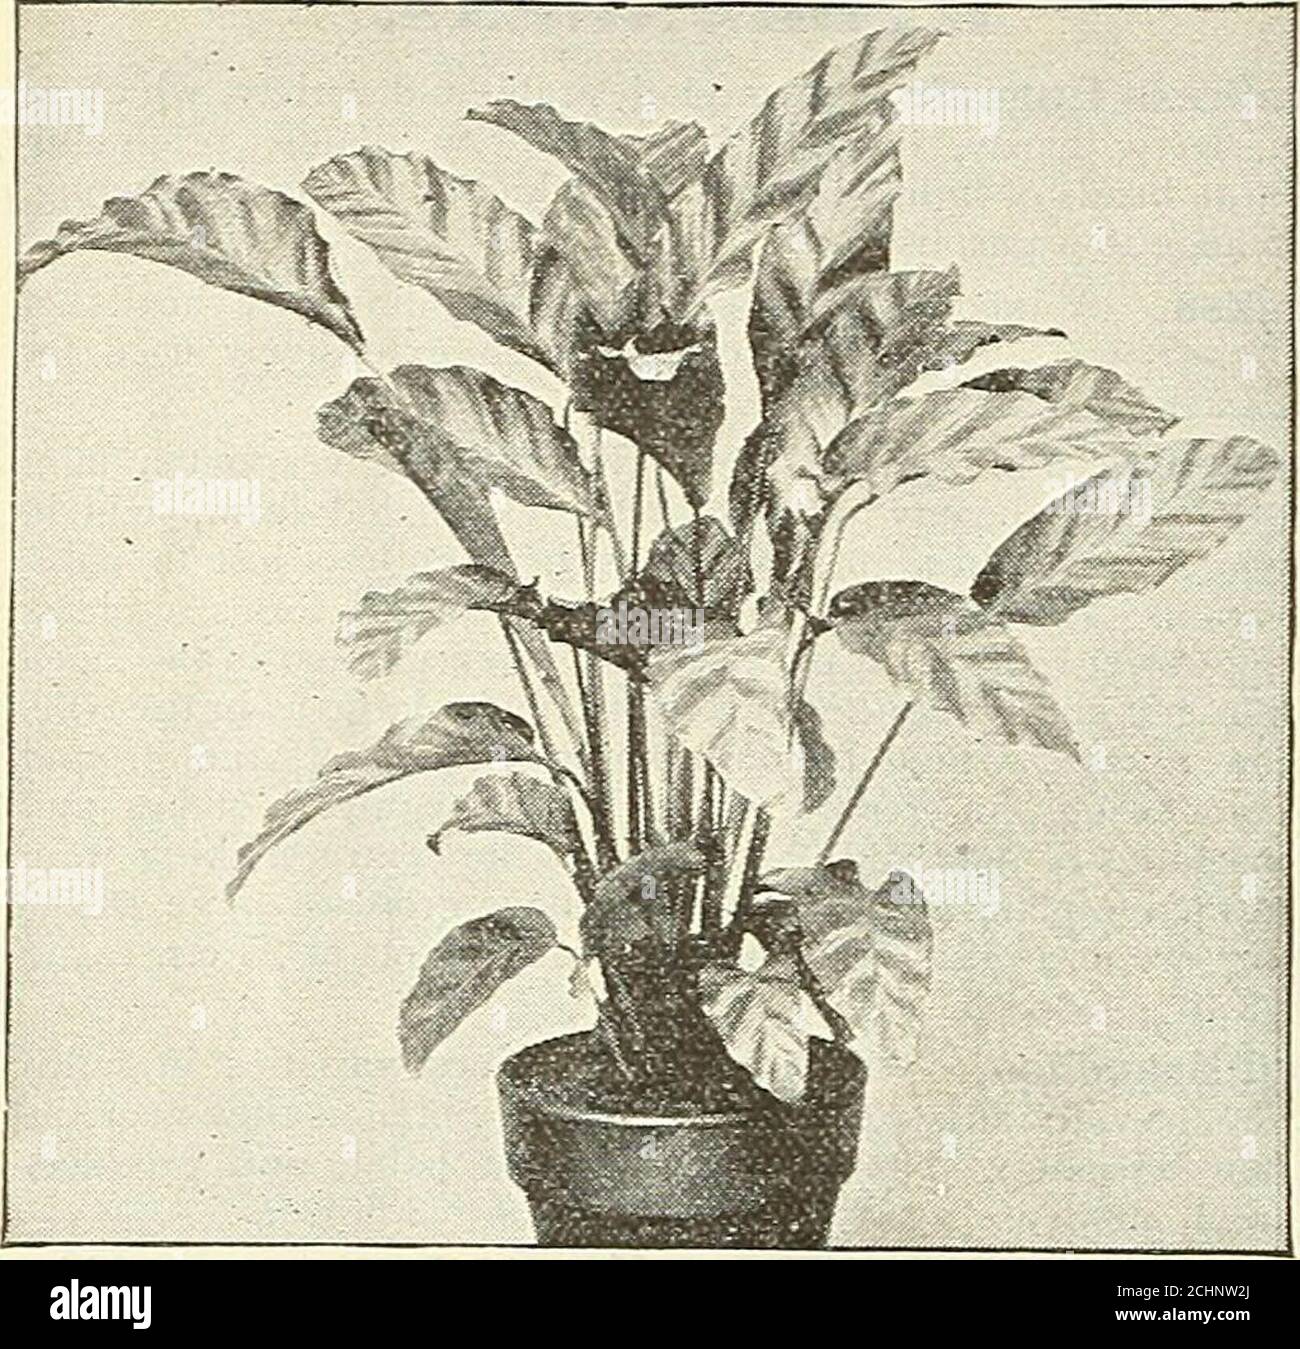 . Dreer's garden 1902 calendar . Jasminum Gracillimum. For Netv and Mare Ilants see pages 19 to 24.. MARANTA. Valuable decorative stove plants, remarkable for the richnessand beauty of their varied foliage.Aurea Striata. 50 cts. each. [ Masangeana. 25 cts. each . Lietzei. (See cut.) 50 cts. eariakoyana. SI.00 each Picta. 50 cts. each.Zebrina. 50 cts. each. Stock Photo